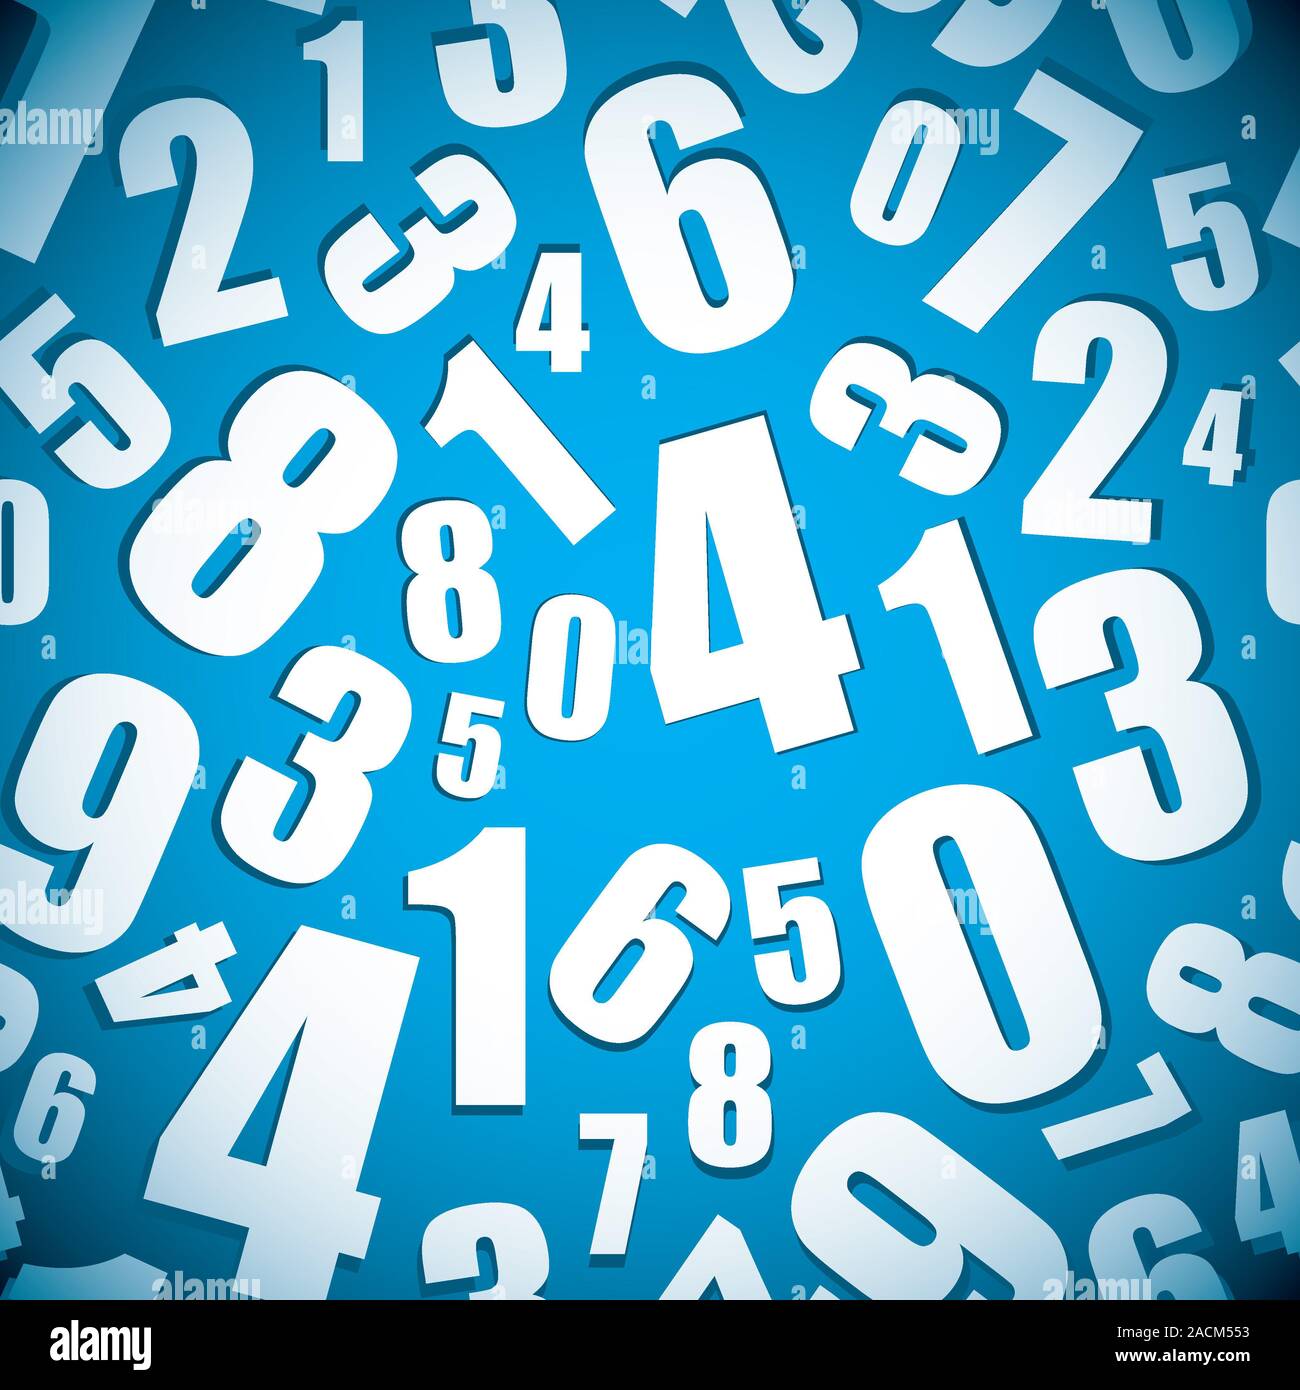 Number seamless background Stock Photo